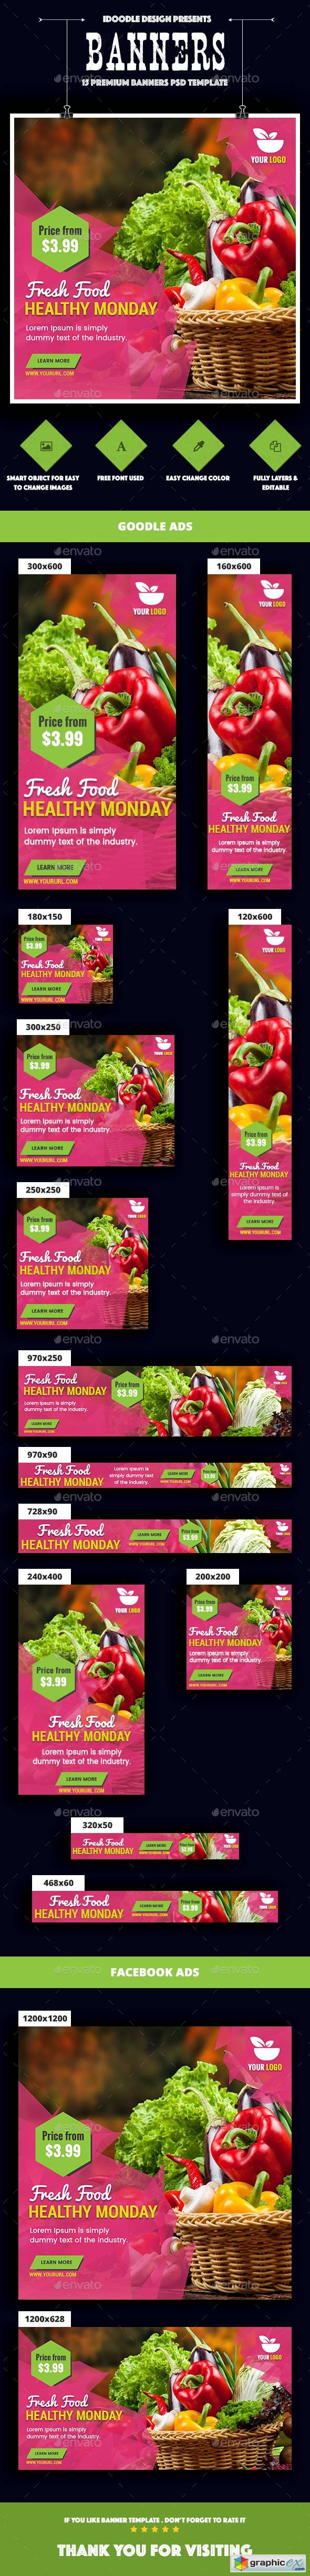 Food & Restaurant Banners Ad 20152854